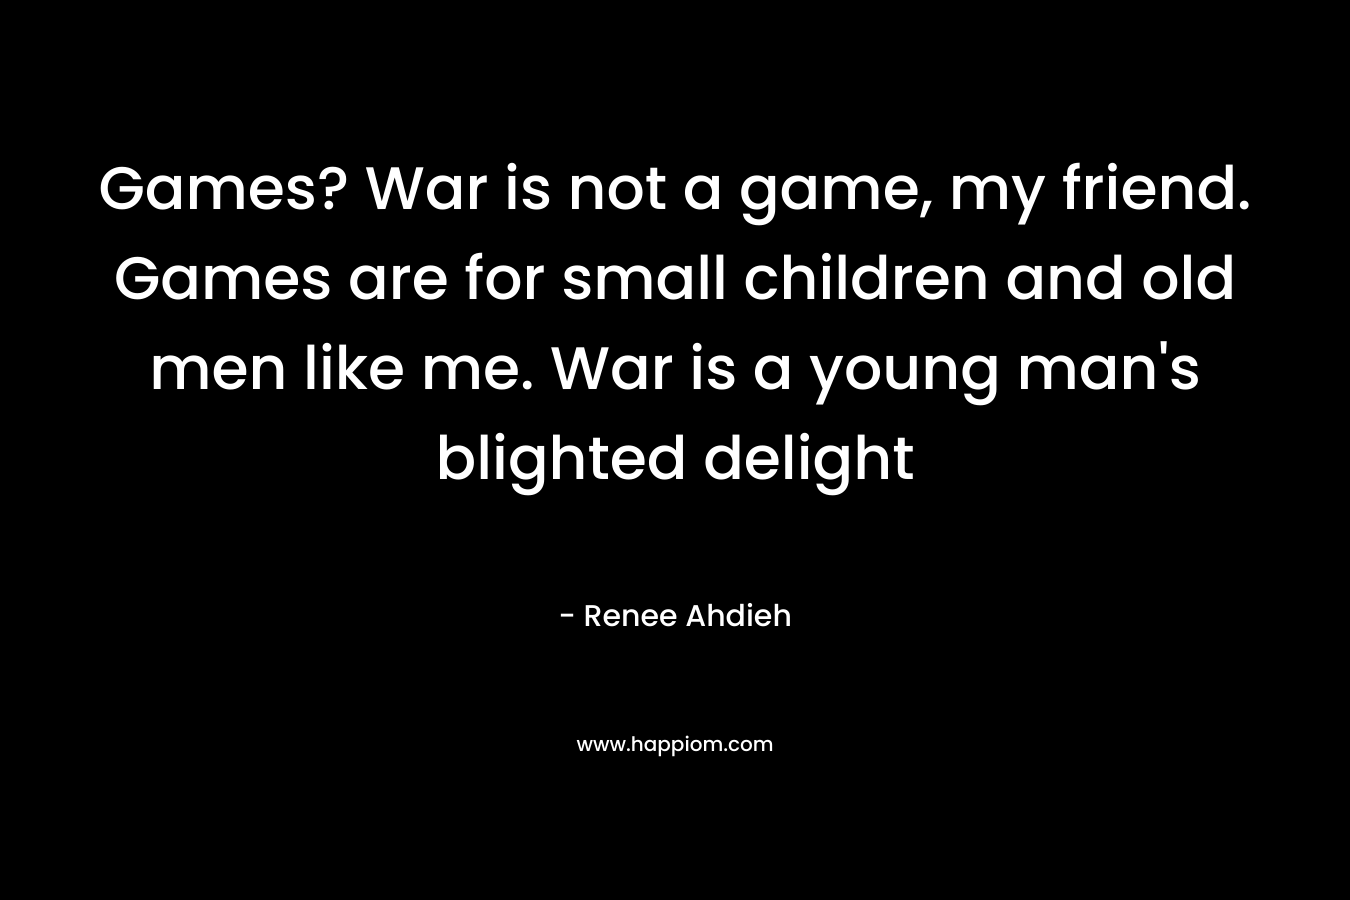 Games? War is not a game, my friend. Games are for small children and old men like me. War is a young man’s blighted delight – Renee Ahdieh